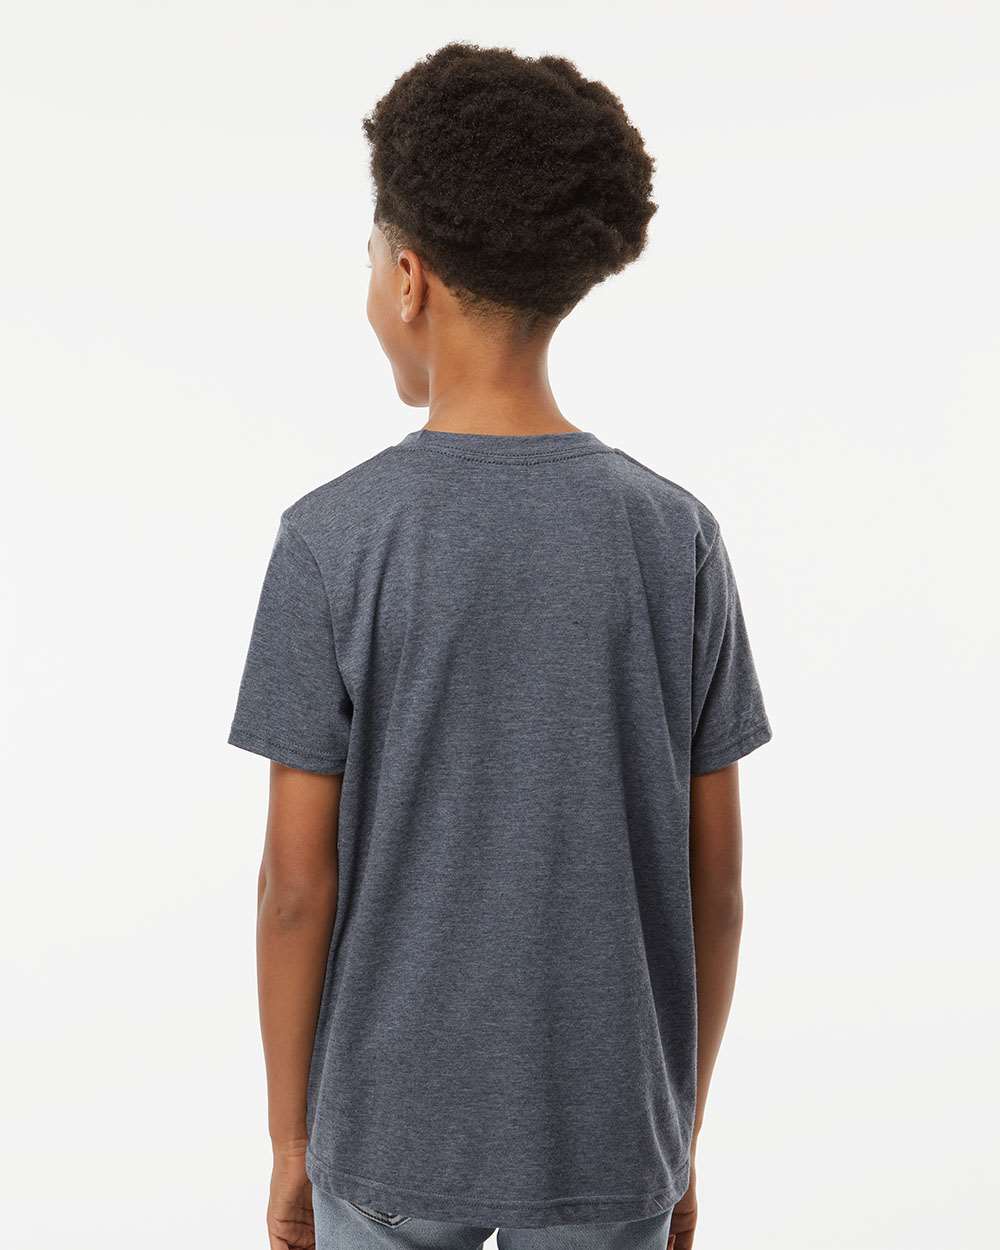 M&O Youth Deluxe Blend T-Shirt 3544 #colormdl_Heather Navy